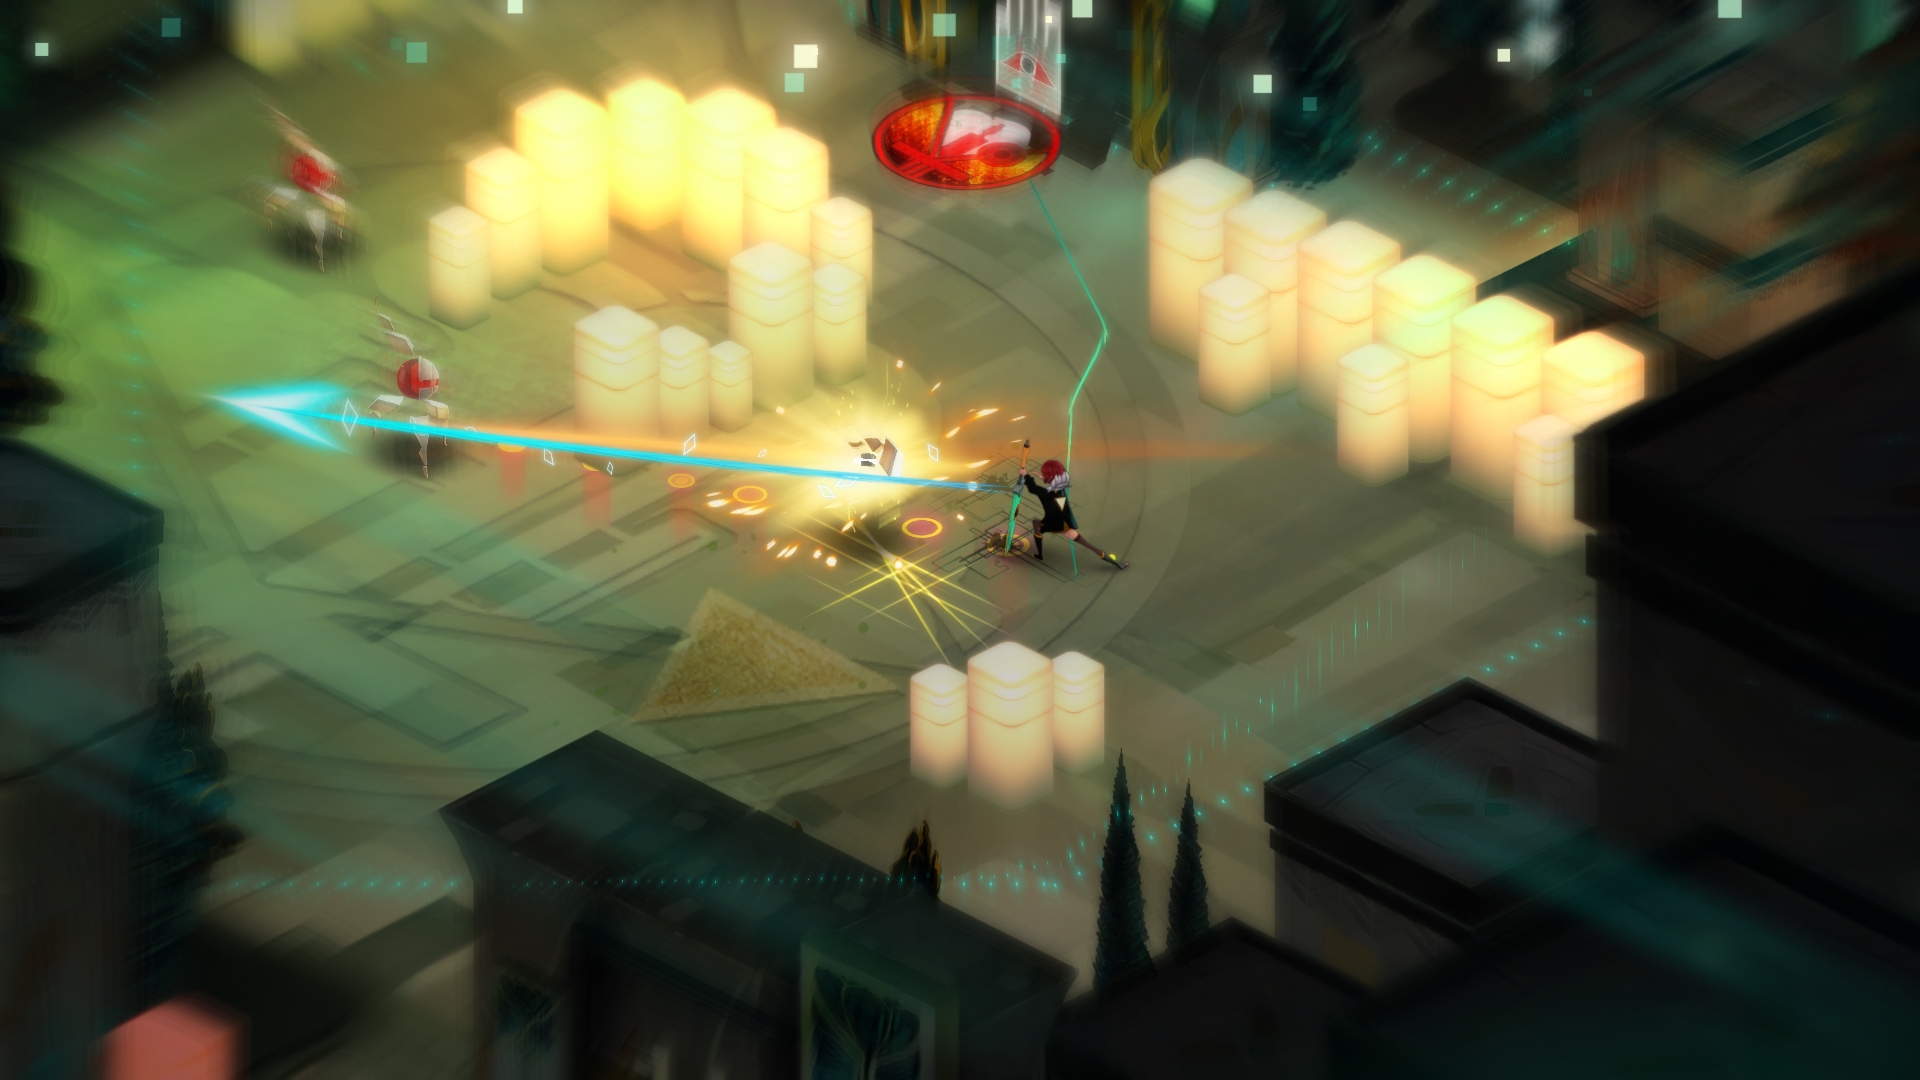 HD wallpaper of the video game Transistor, featuring a character in combat within a vibrant, stylized cityscape.